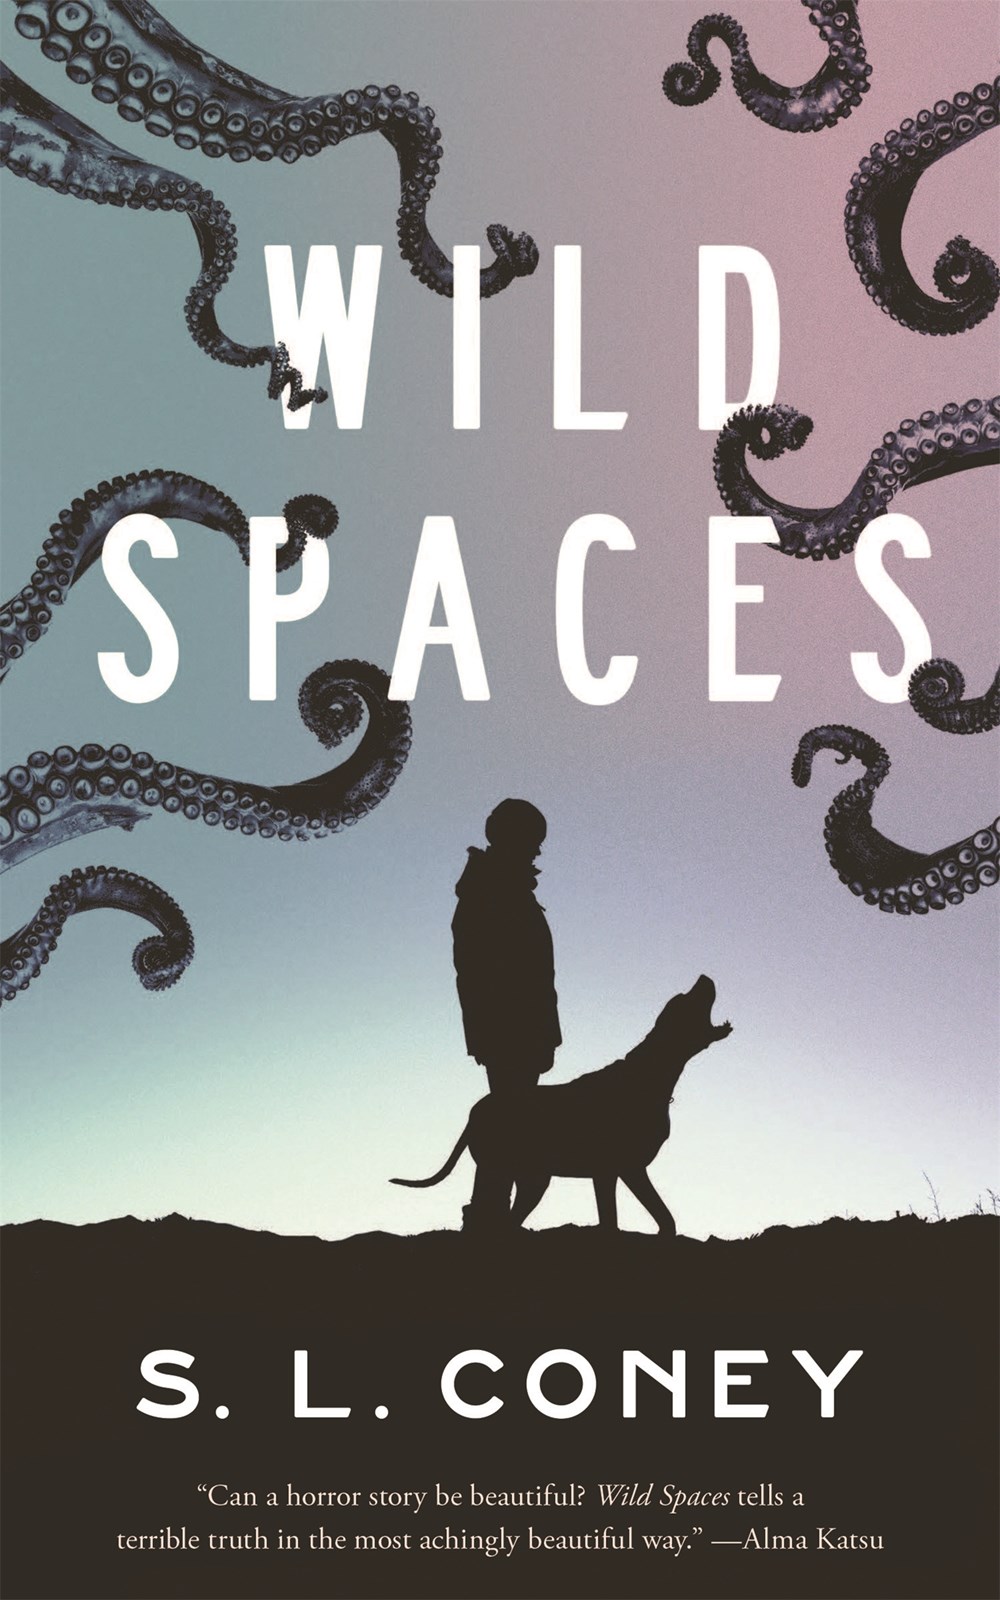 Wild Spaces by S. L. Coney